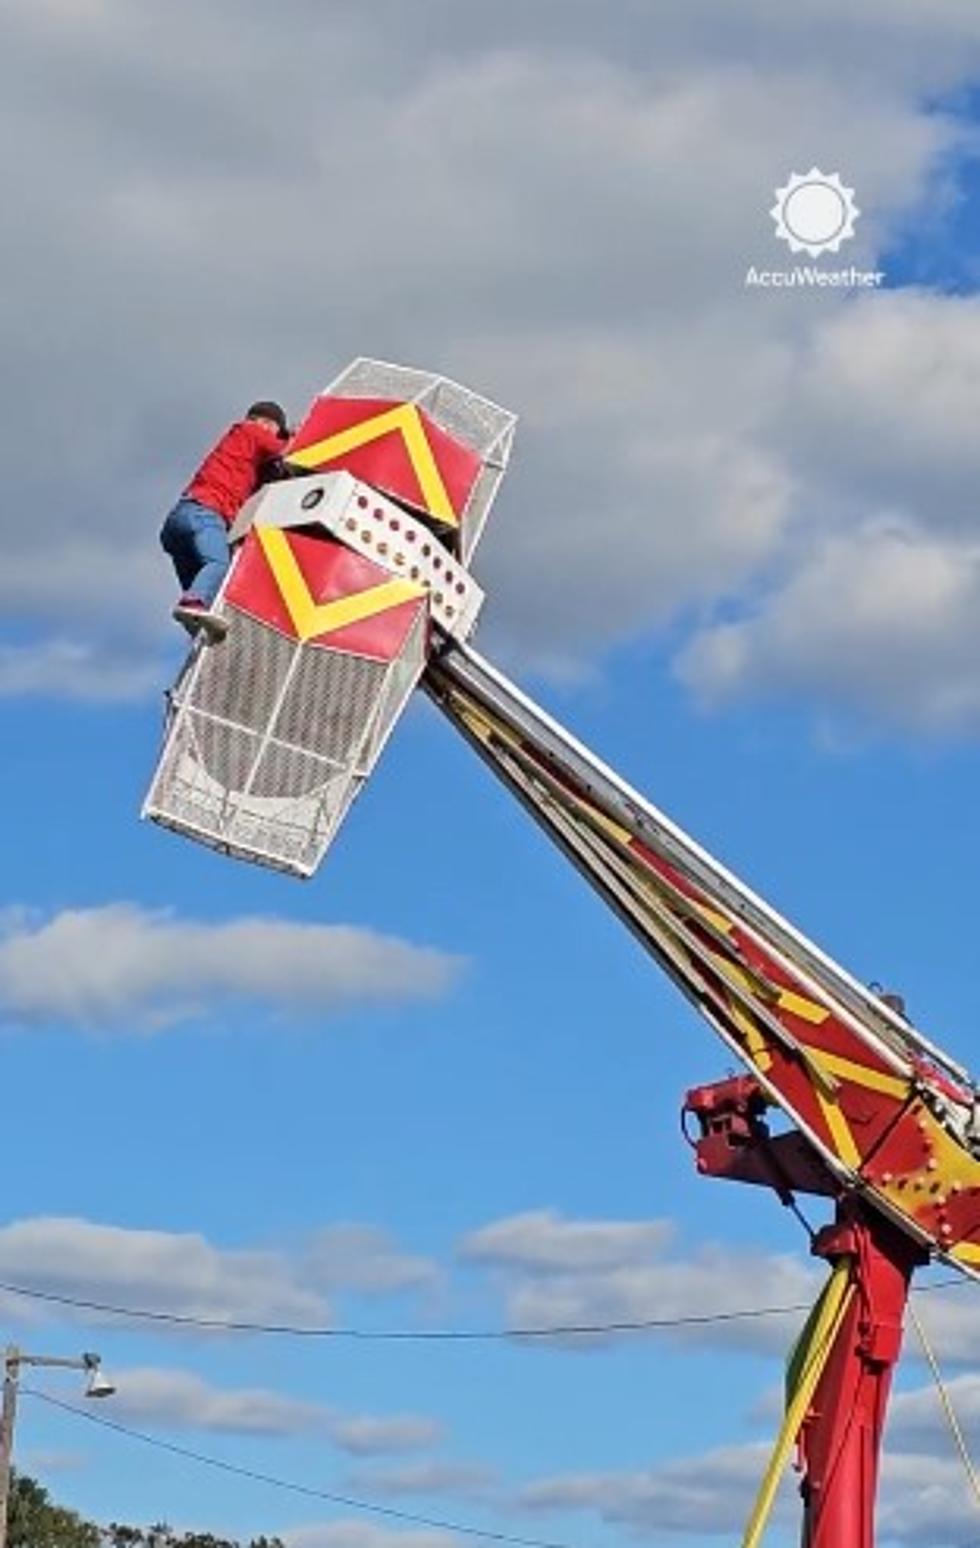 Texas Carnival Worker Hangs From a Ride During Freak Accident